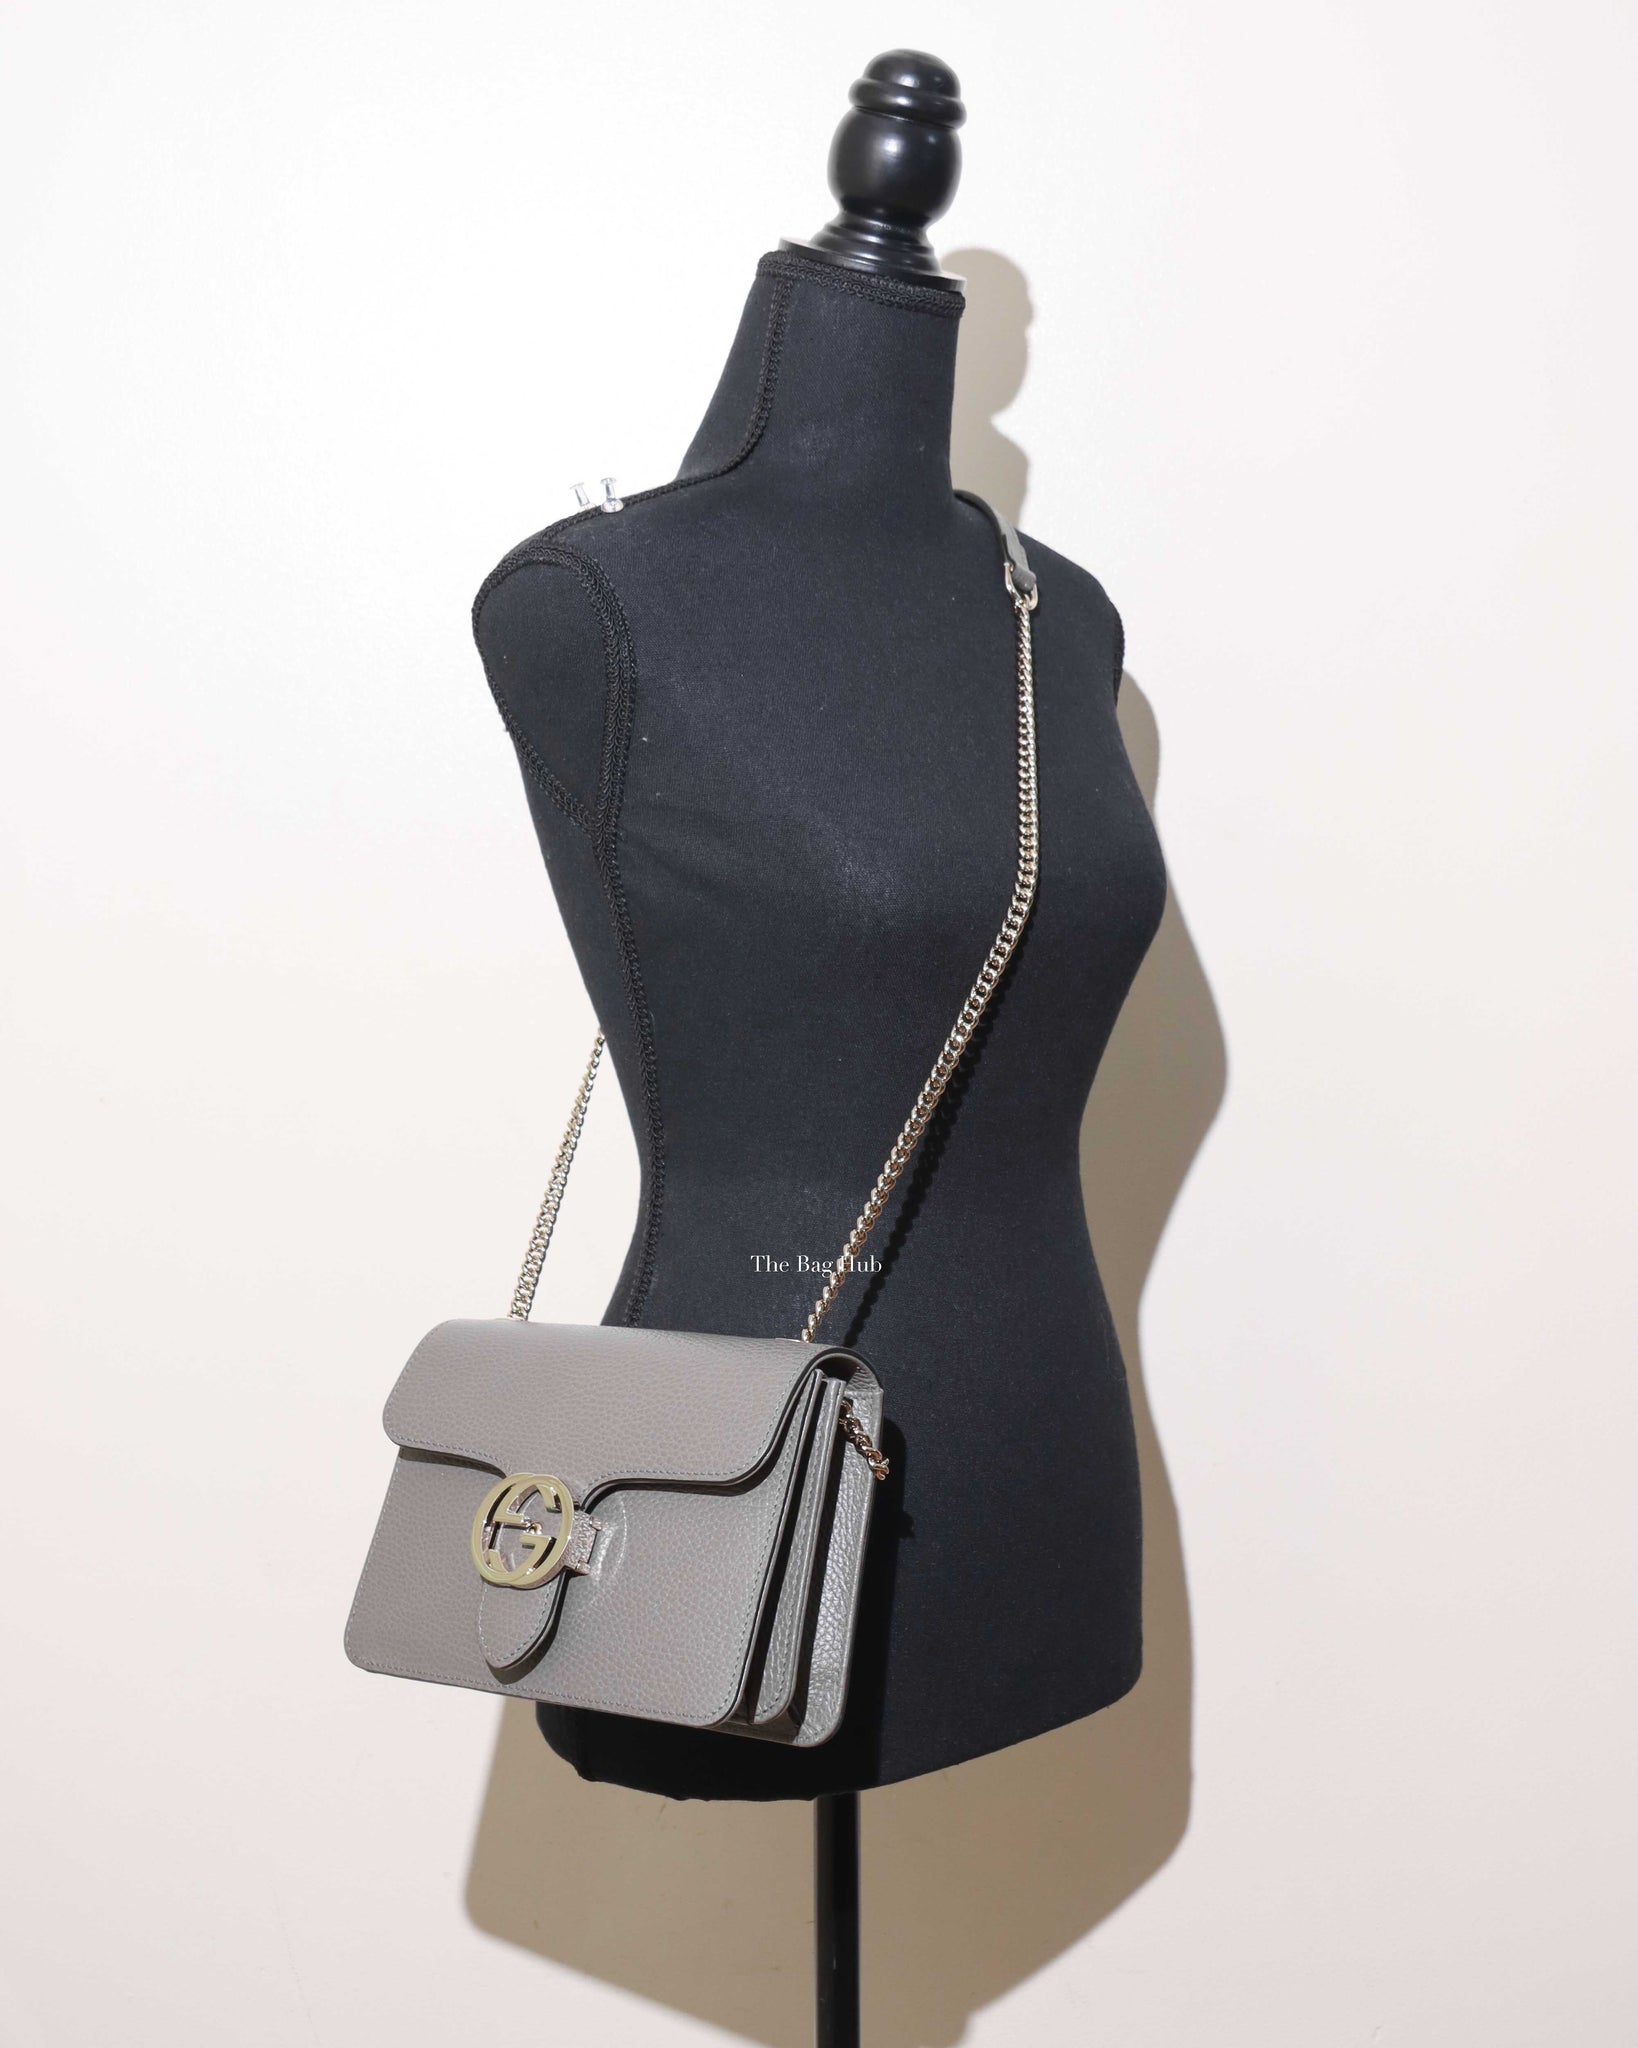 Gucci Interlocking Shoulder Bag (Outlet) Leather Small Neutral 1892512